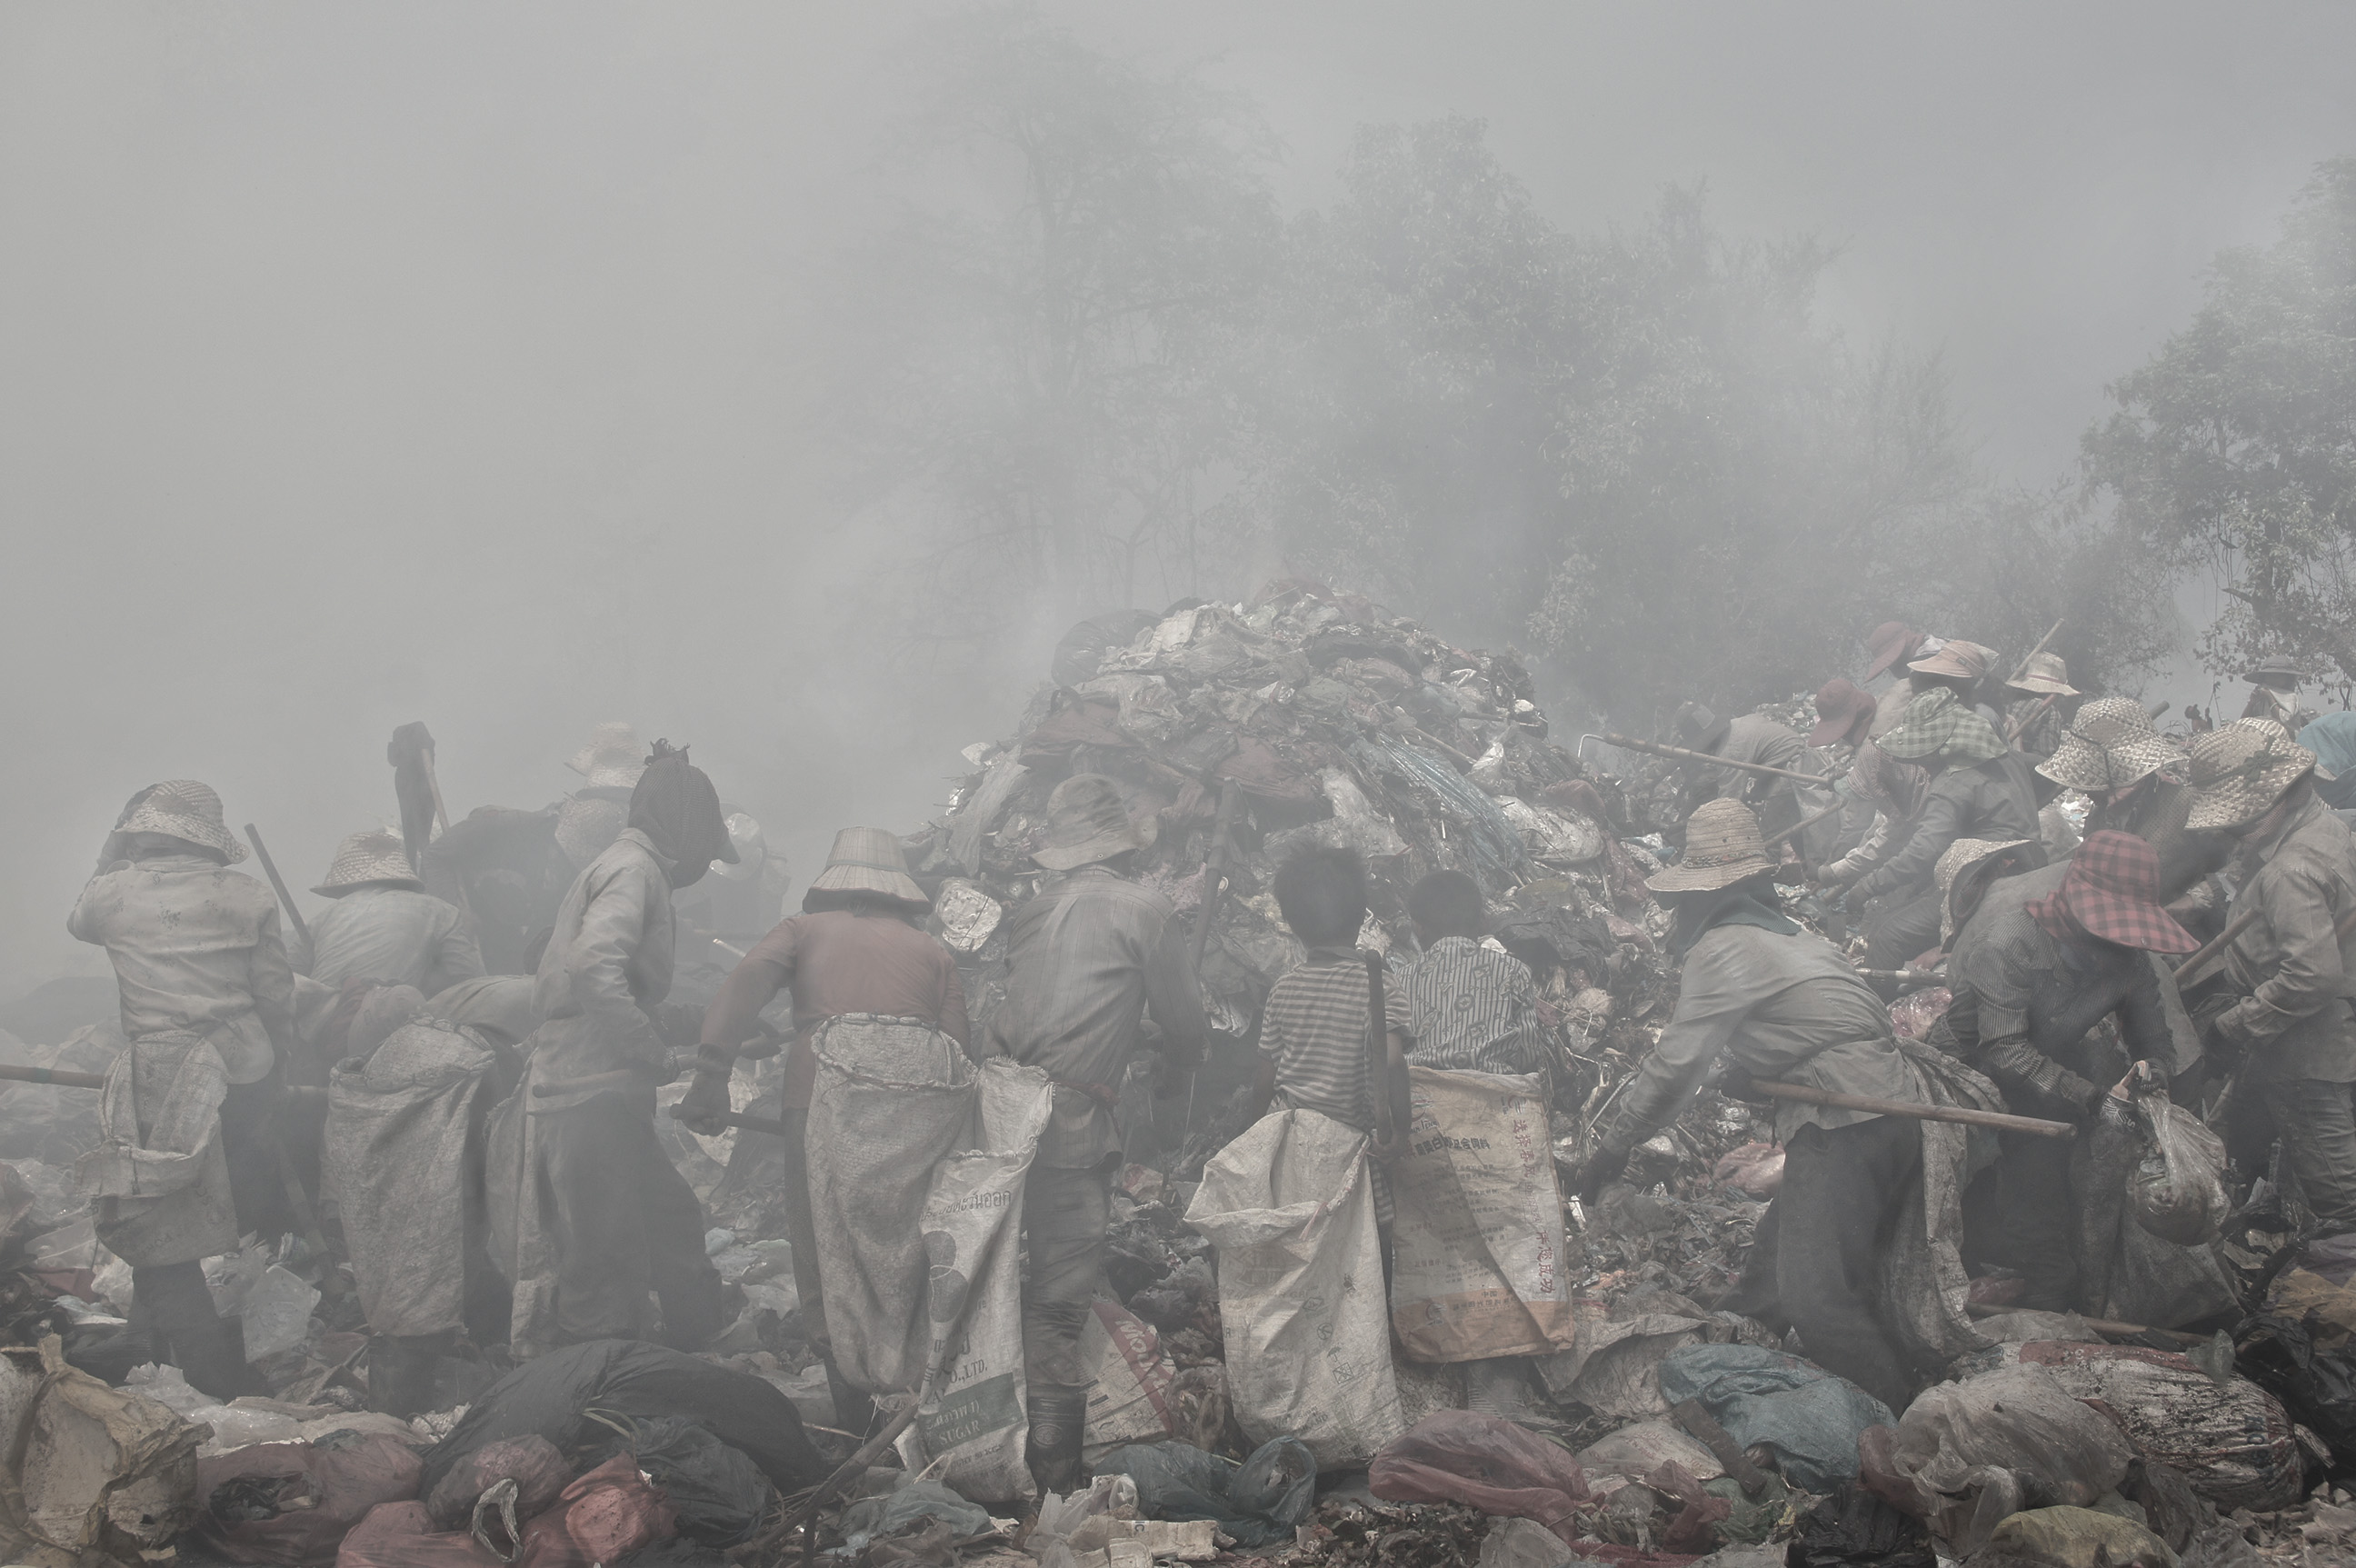 A truck drops a fresh load of waste and the frantic rush begins, as workers battle true the thick smoke to be the first to find the best recyclable items